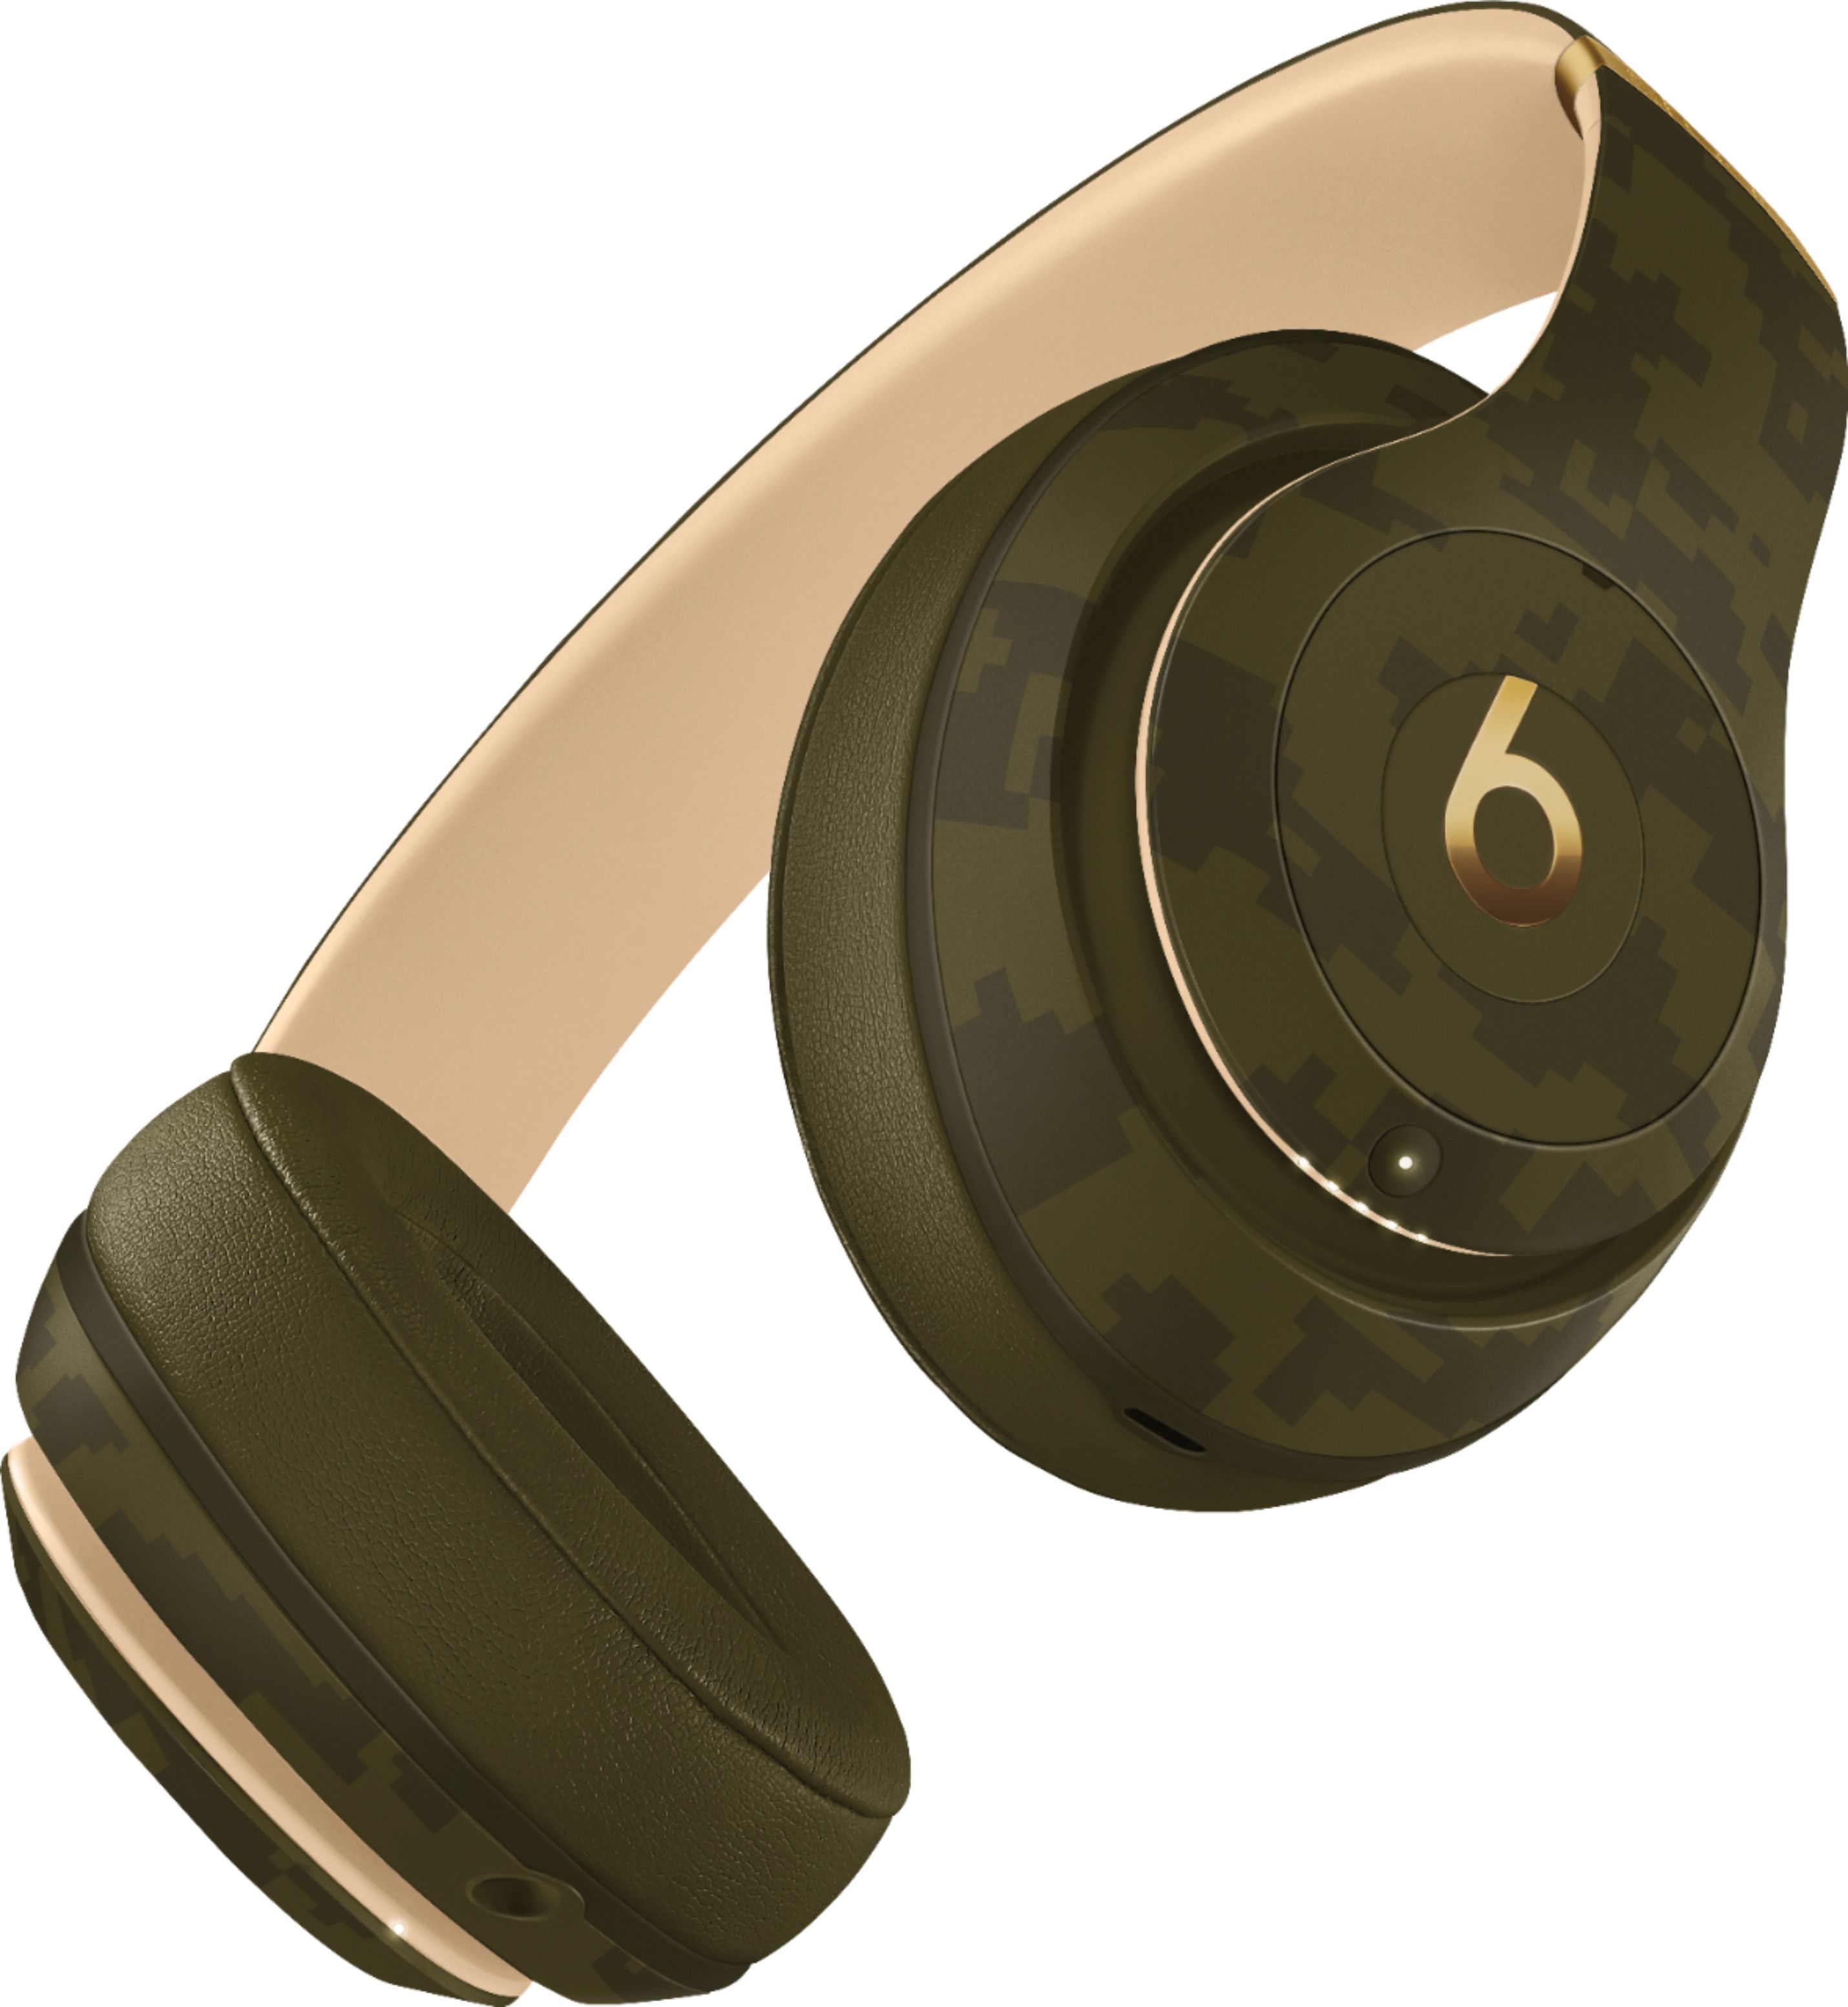 beats studio 3 compatible with ps4